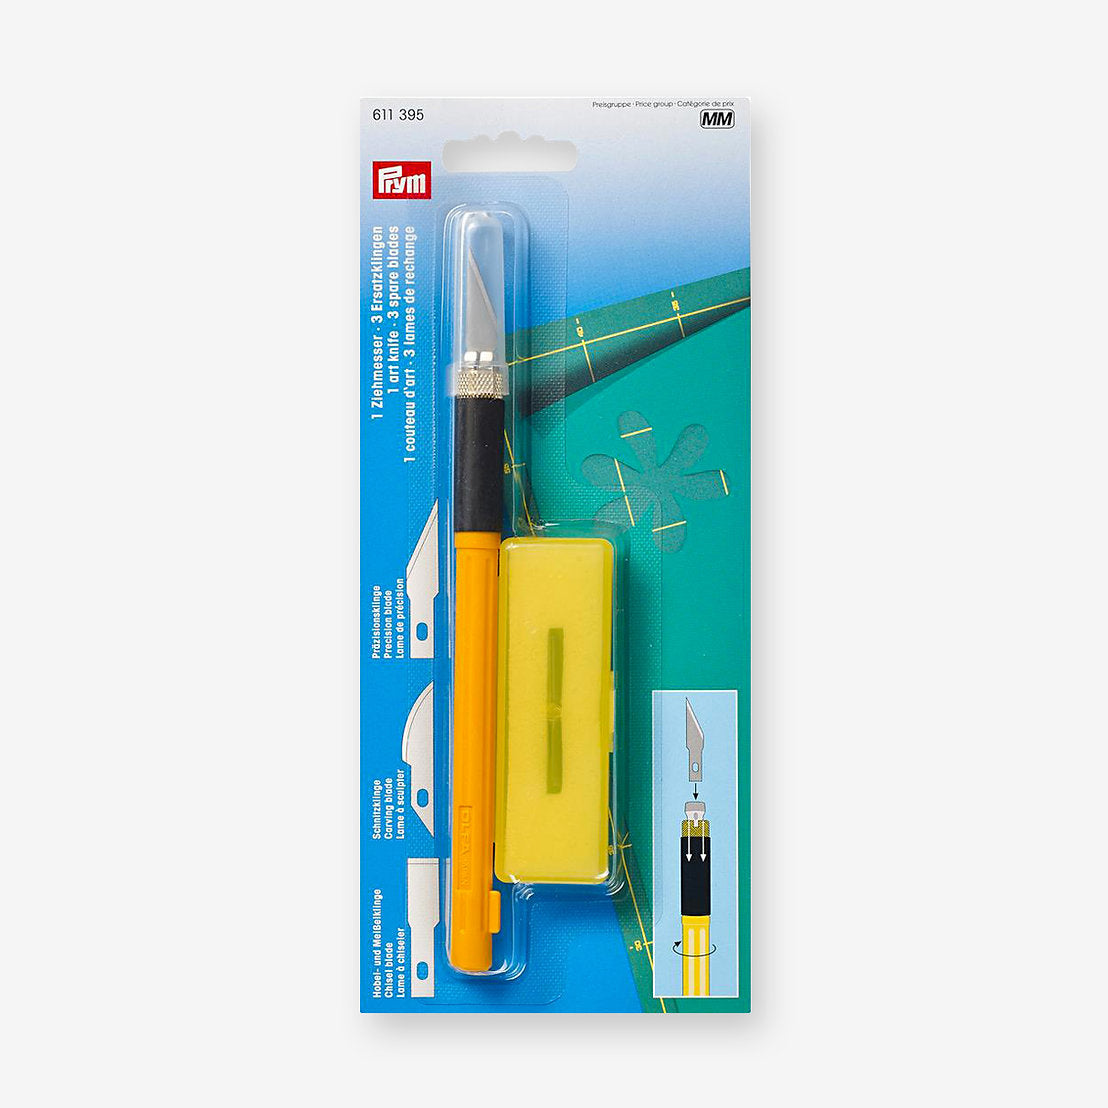 Prym 611395 art knife with 3 specialized blades and non-slip handle for precise cuts